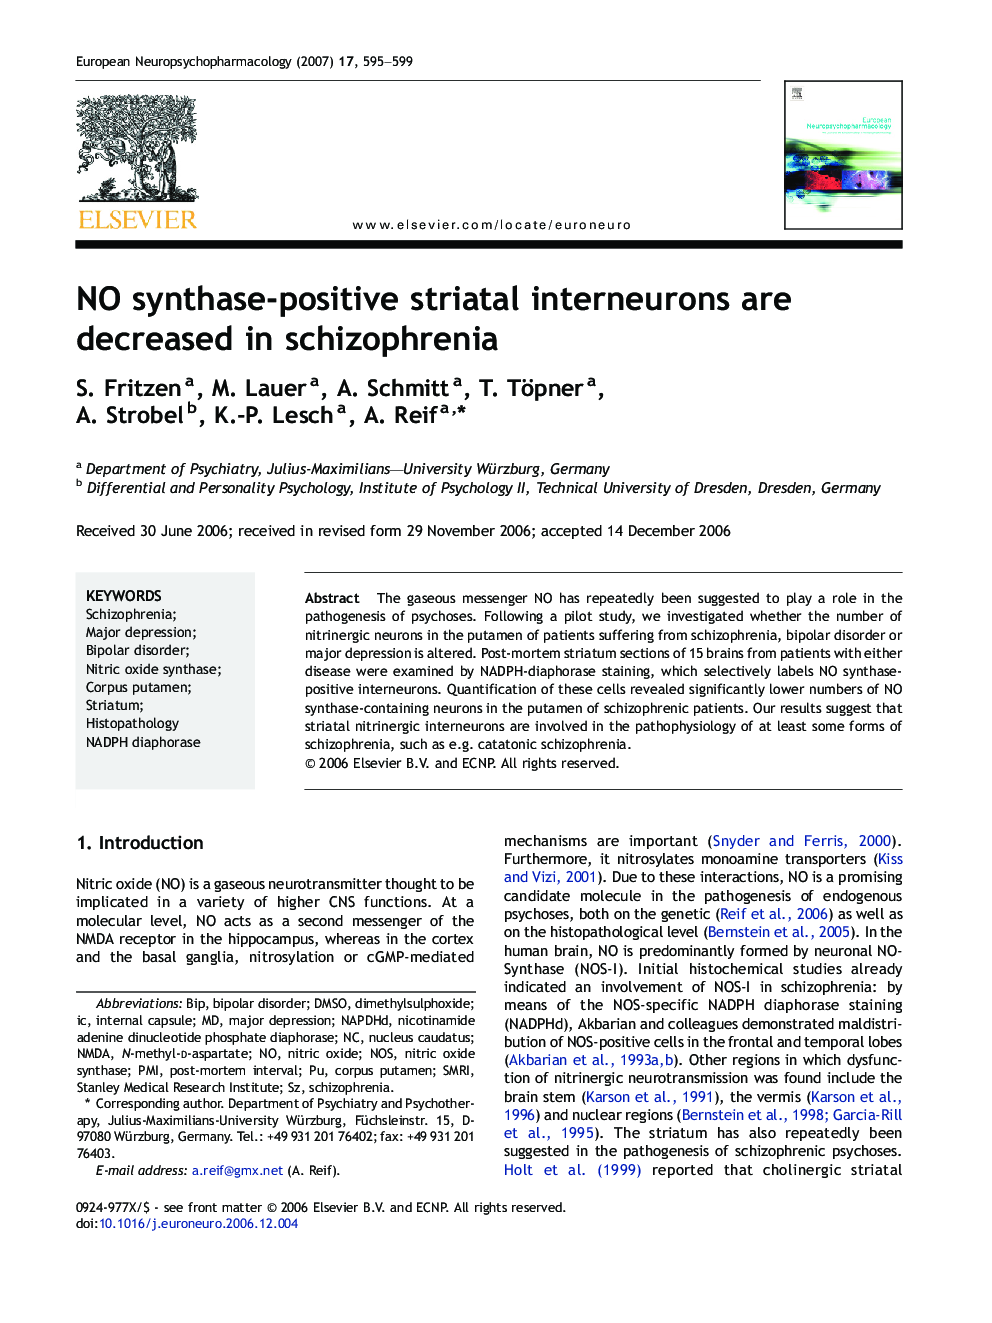 NO synthase-positive striatal interneurons are decreased in schizophrenia